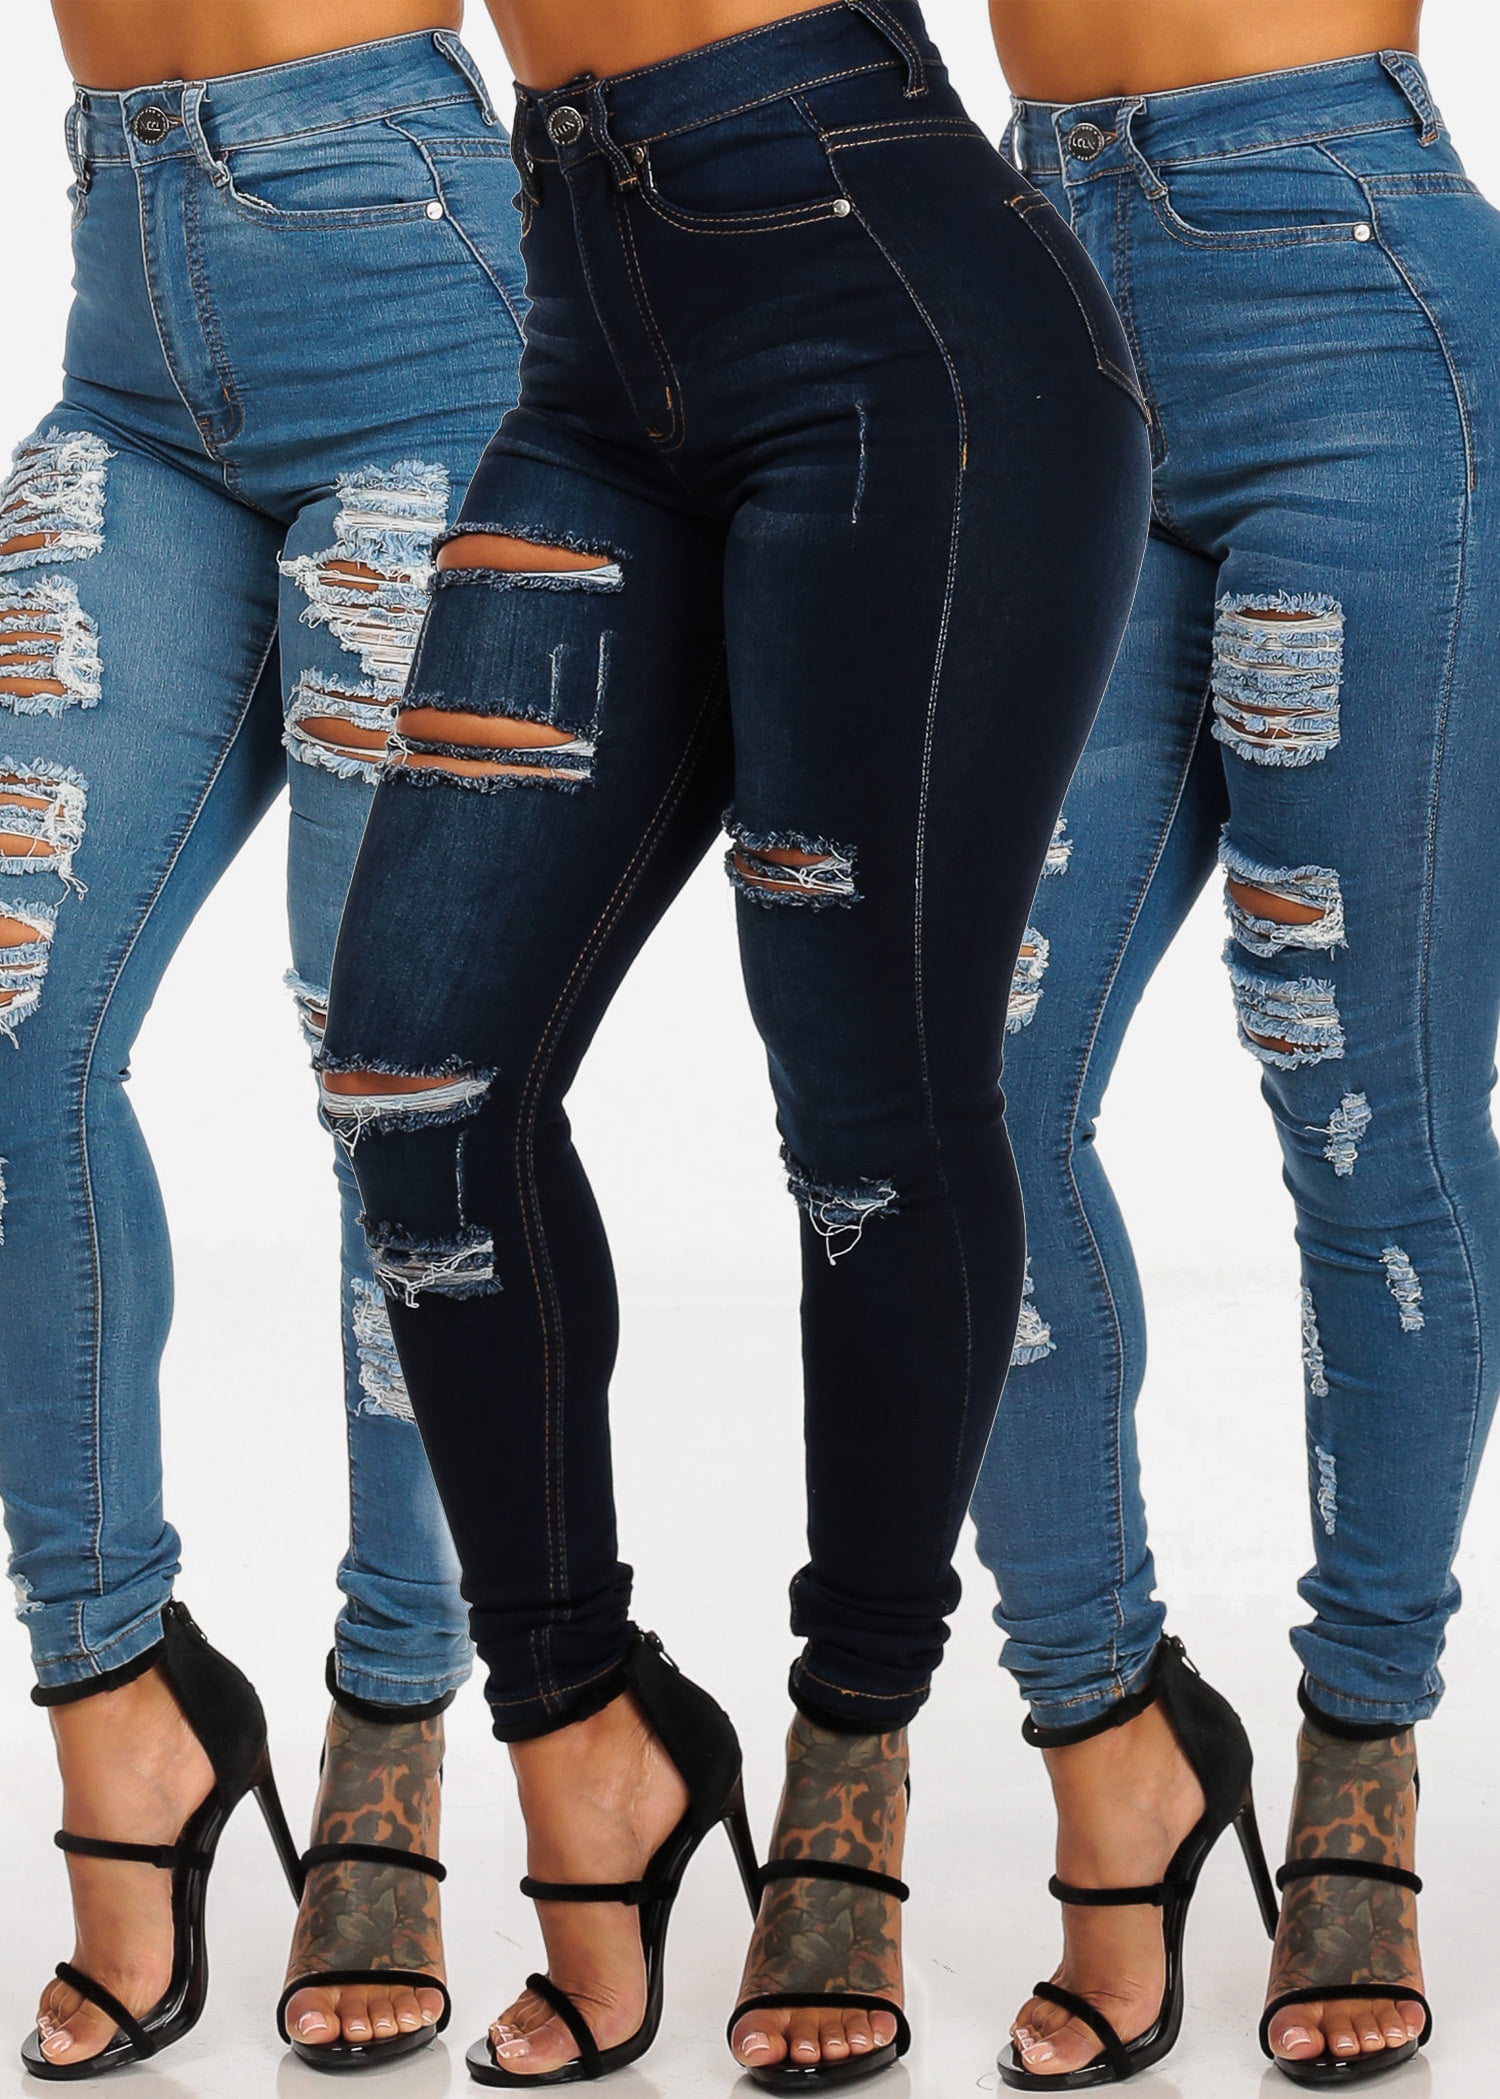 Moda Xpress - CLEARANCE! JEANS ON SALE 